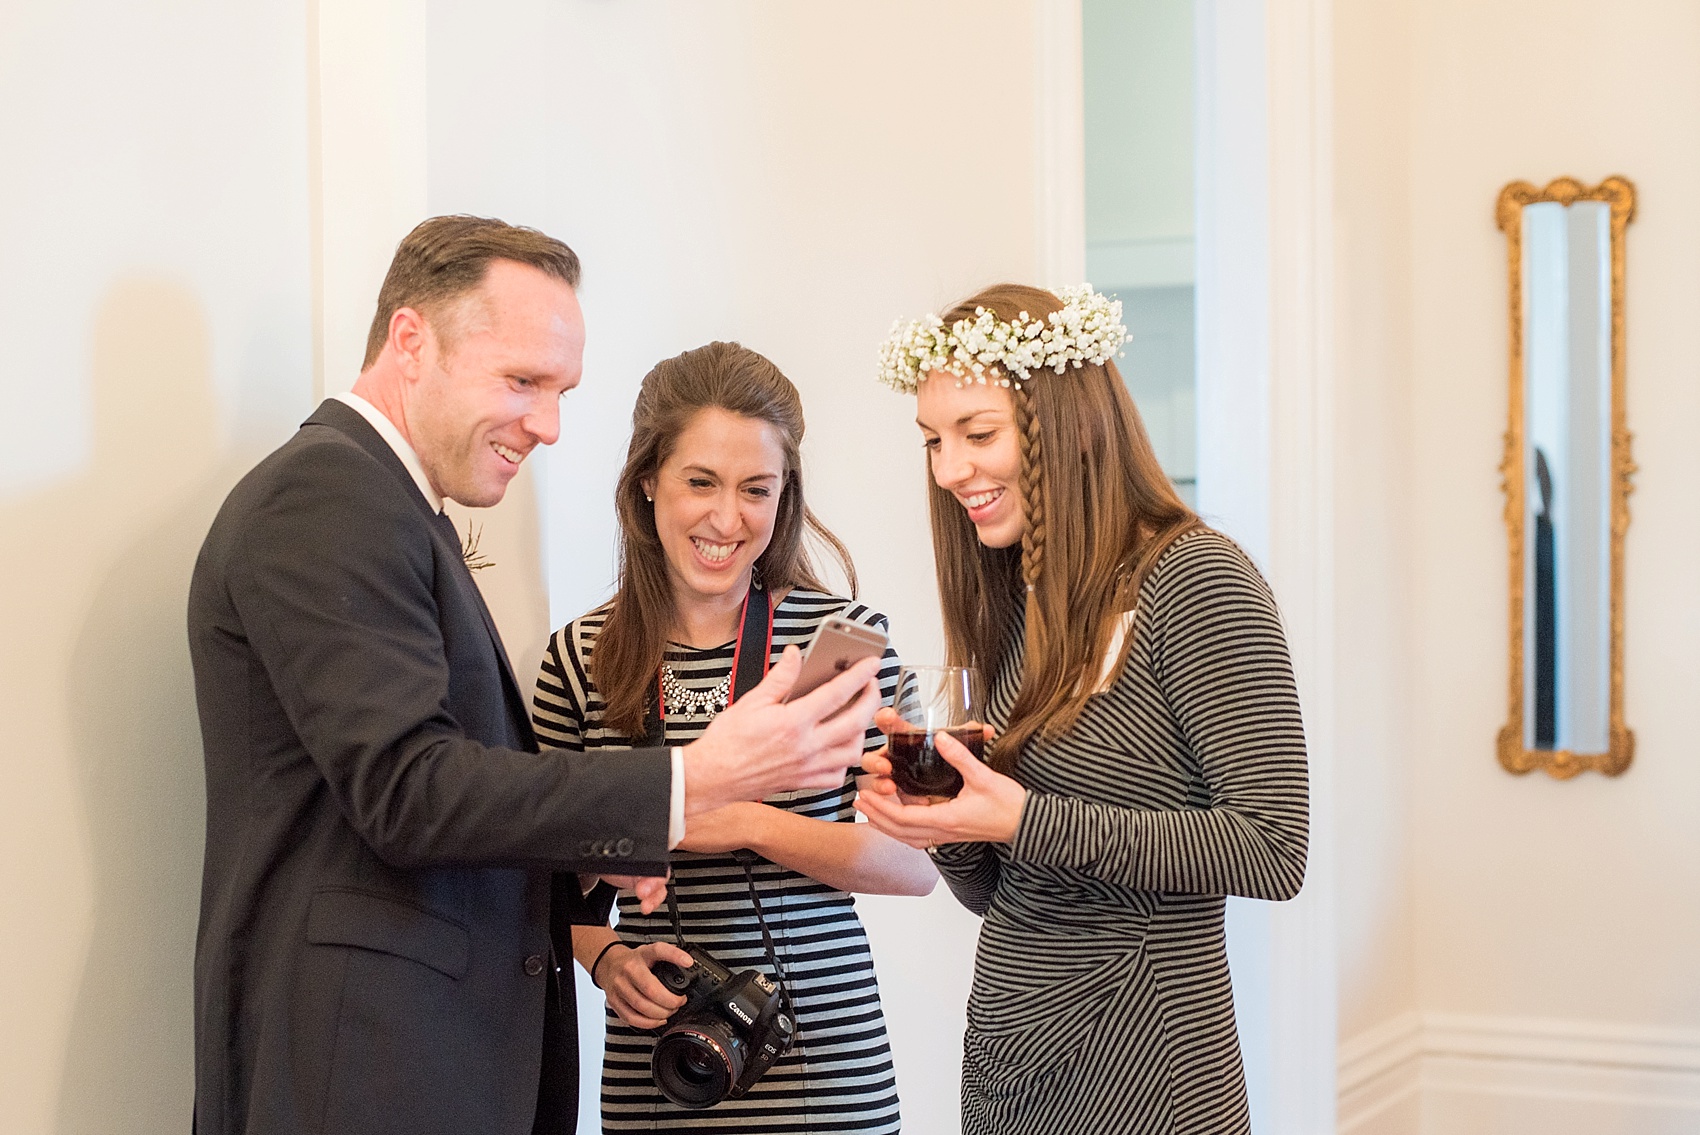 Raleigh North Carolina wedding photographer Mikkel Paige visits Merrimon-Wynne bridal event, featuring Southern Bride and Groom magazine.